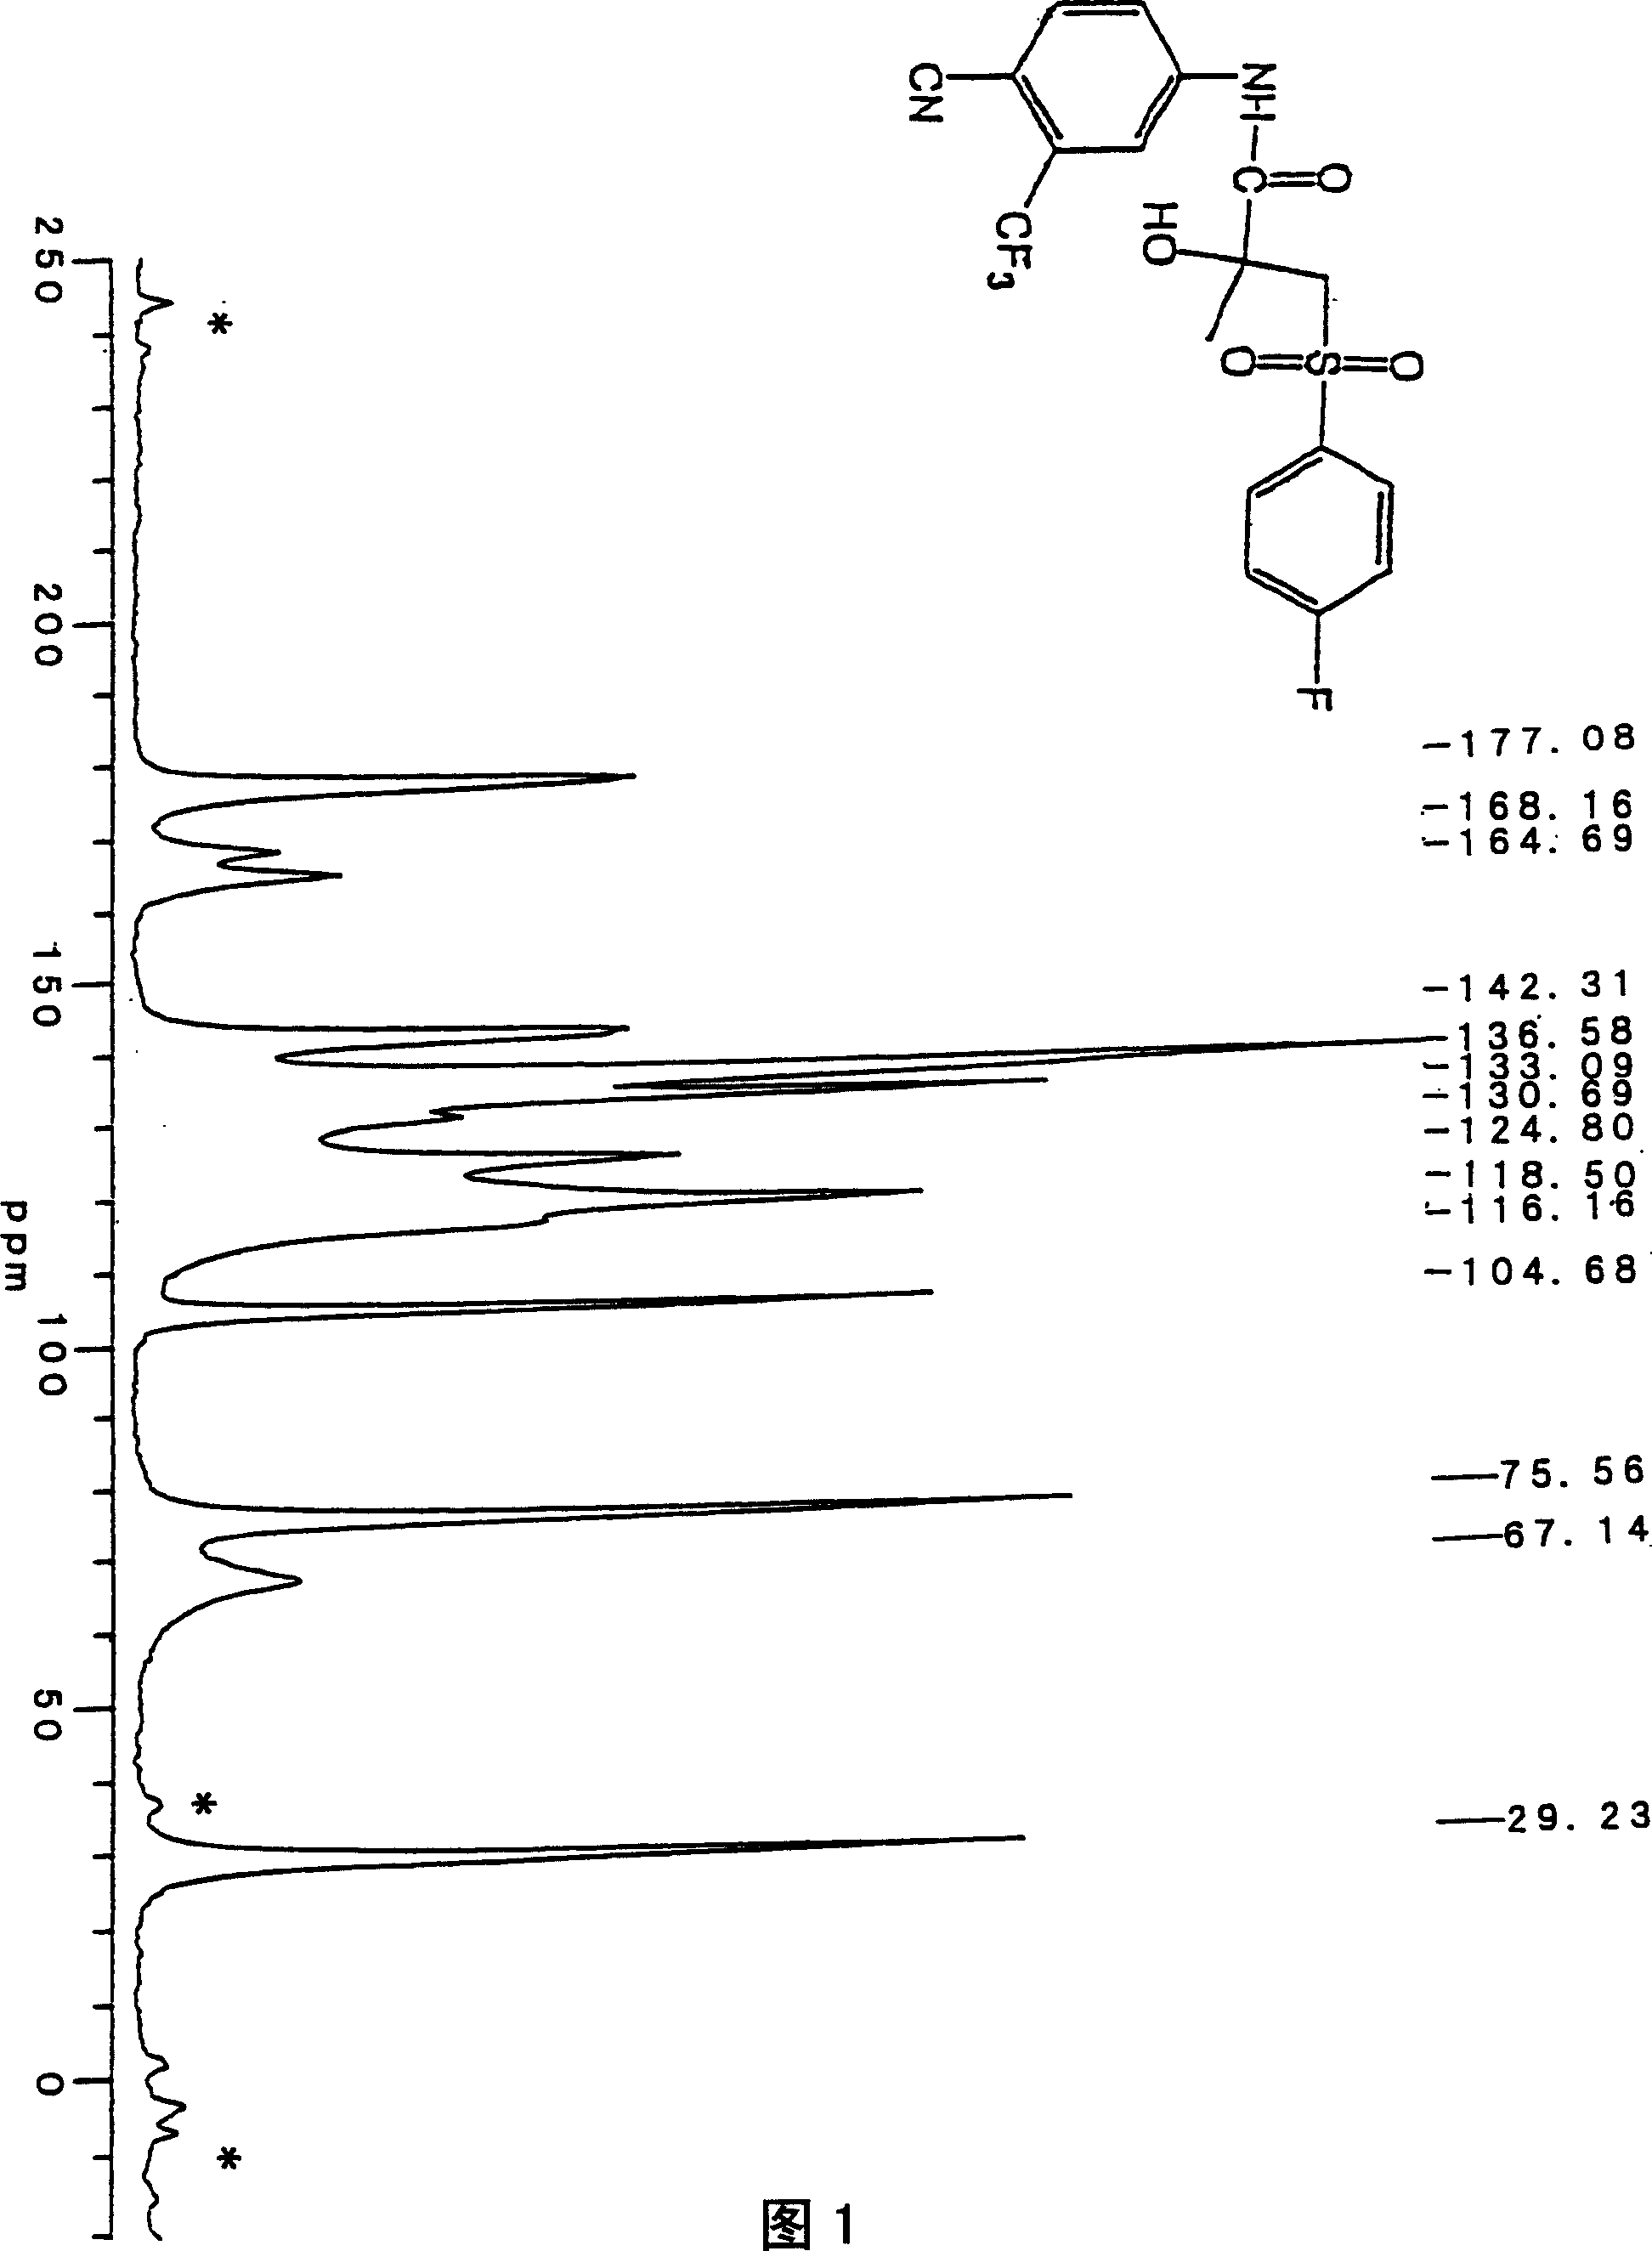 Crystals of bicalutamide and process for their production